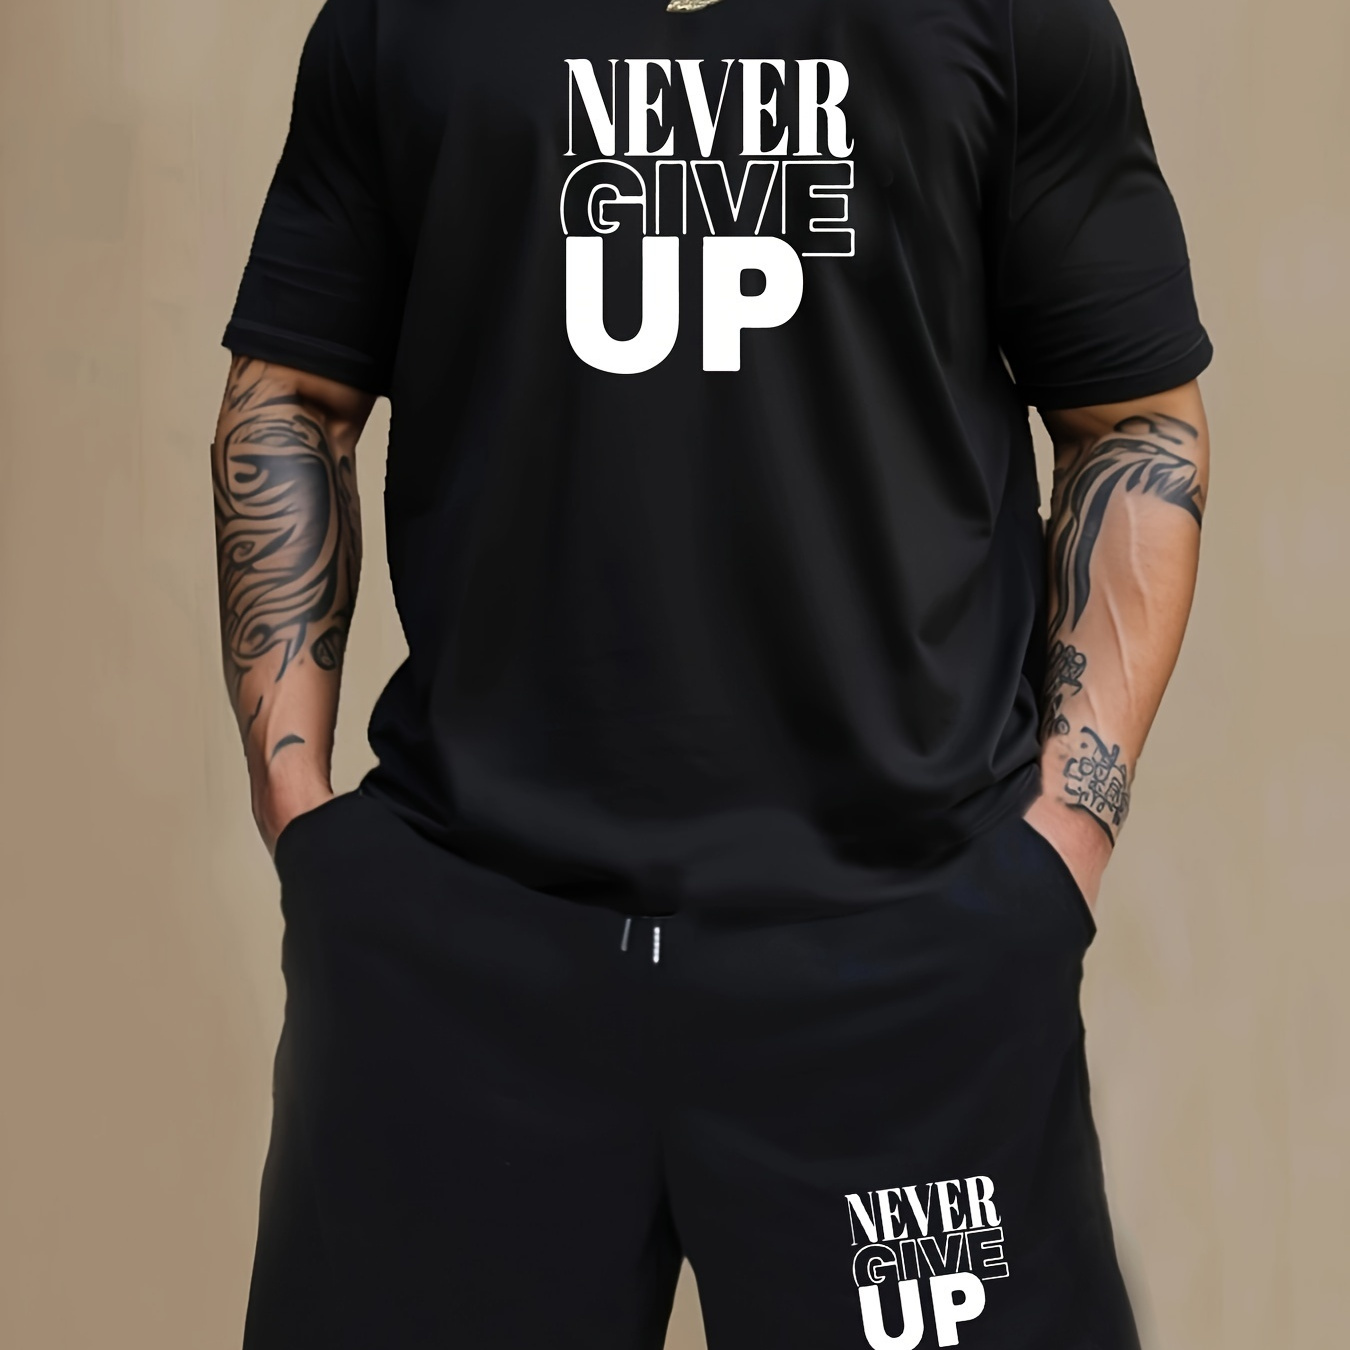 

2 Pcs Men's Pajama Sets, Never Give Up English Letter Print Short Sleeve T-shirts & Shorts, Comfortable & Gentle Style Pajamas For Men's Summer Cozy Loungewear